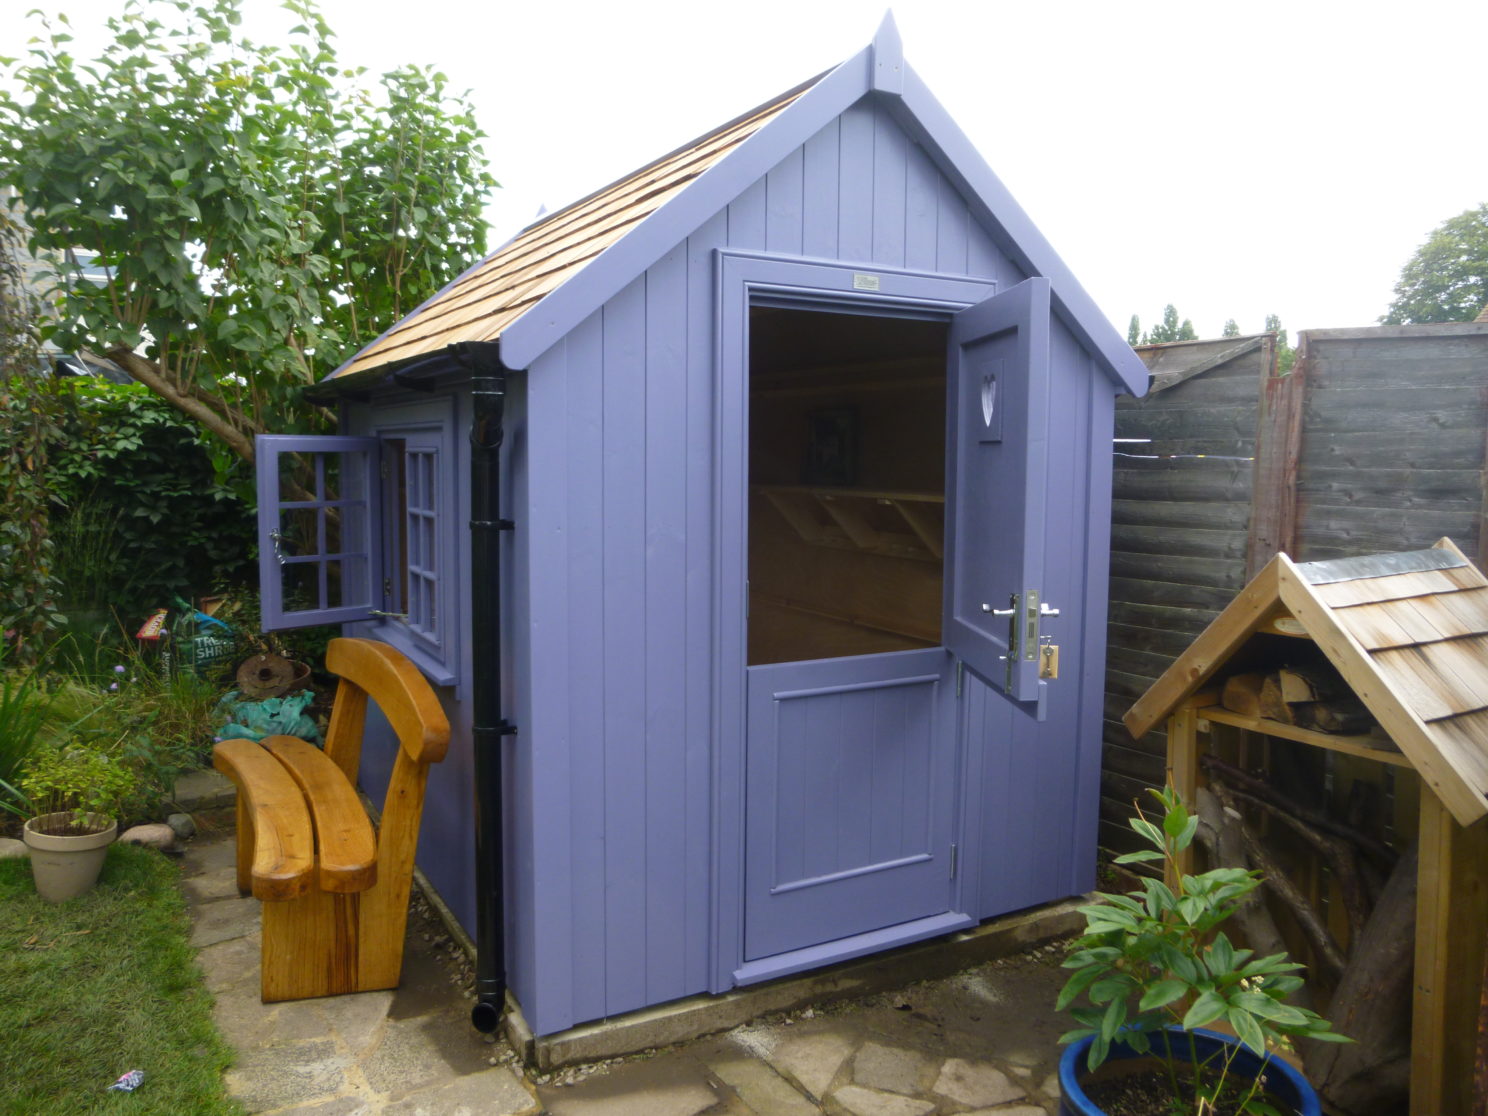 Prettiest Posh Shed of the Year Awards